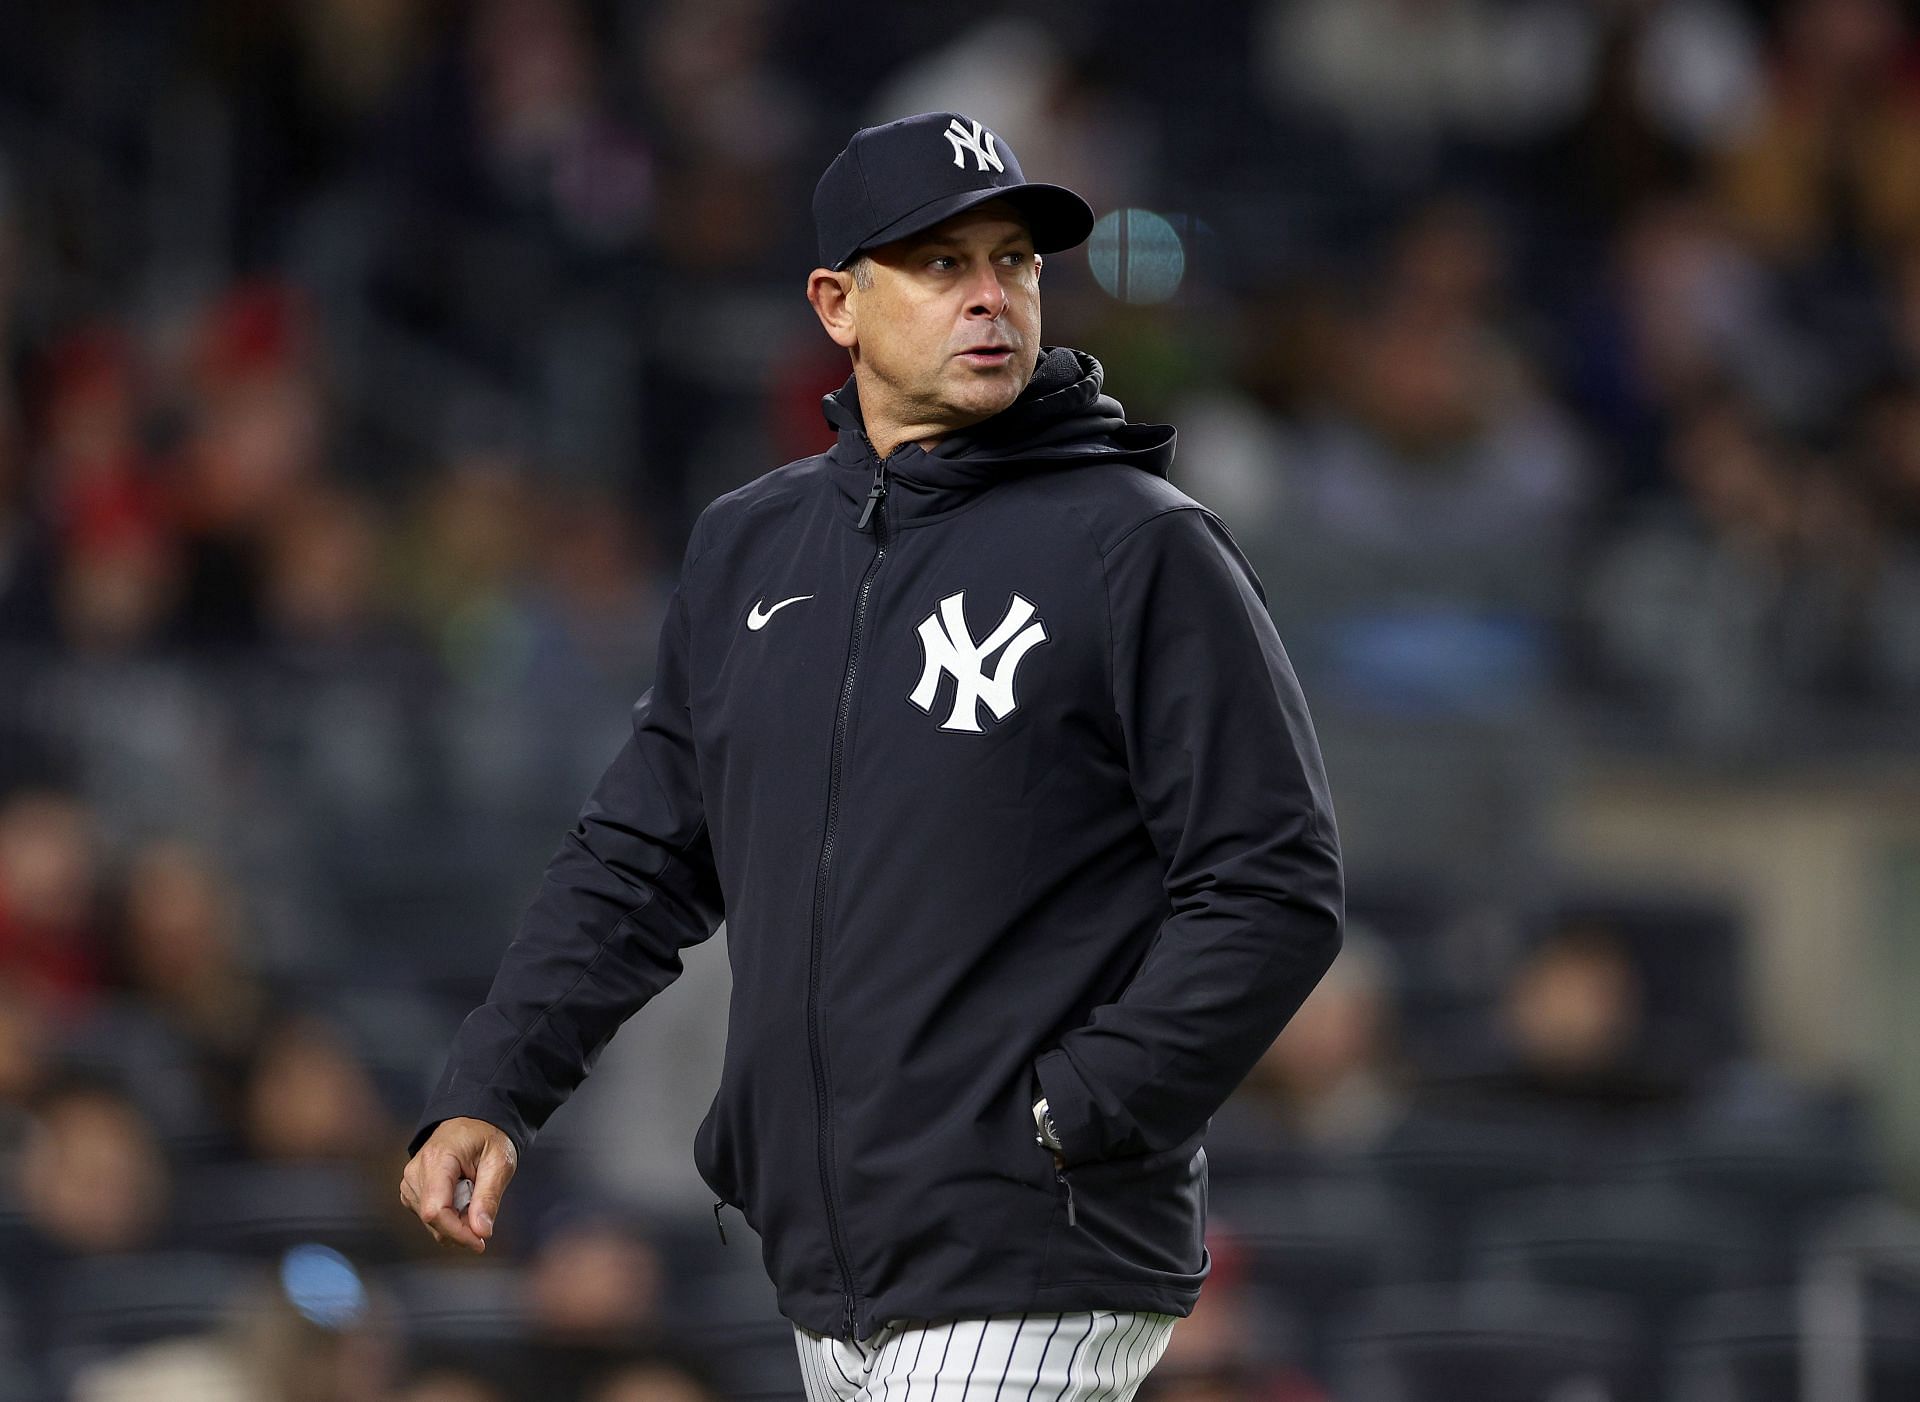 New York Yankees manager Aaron Boone seeks to inspire struggling offense  with club's iconic legacy: We've got to be better